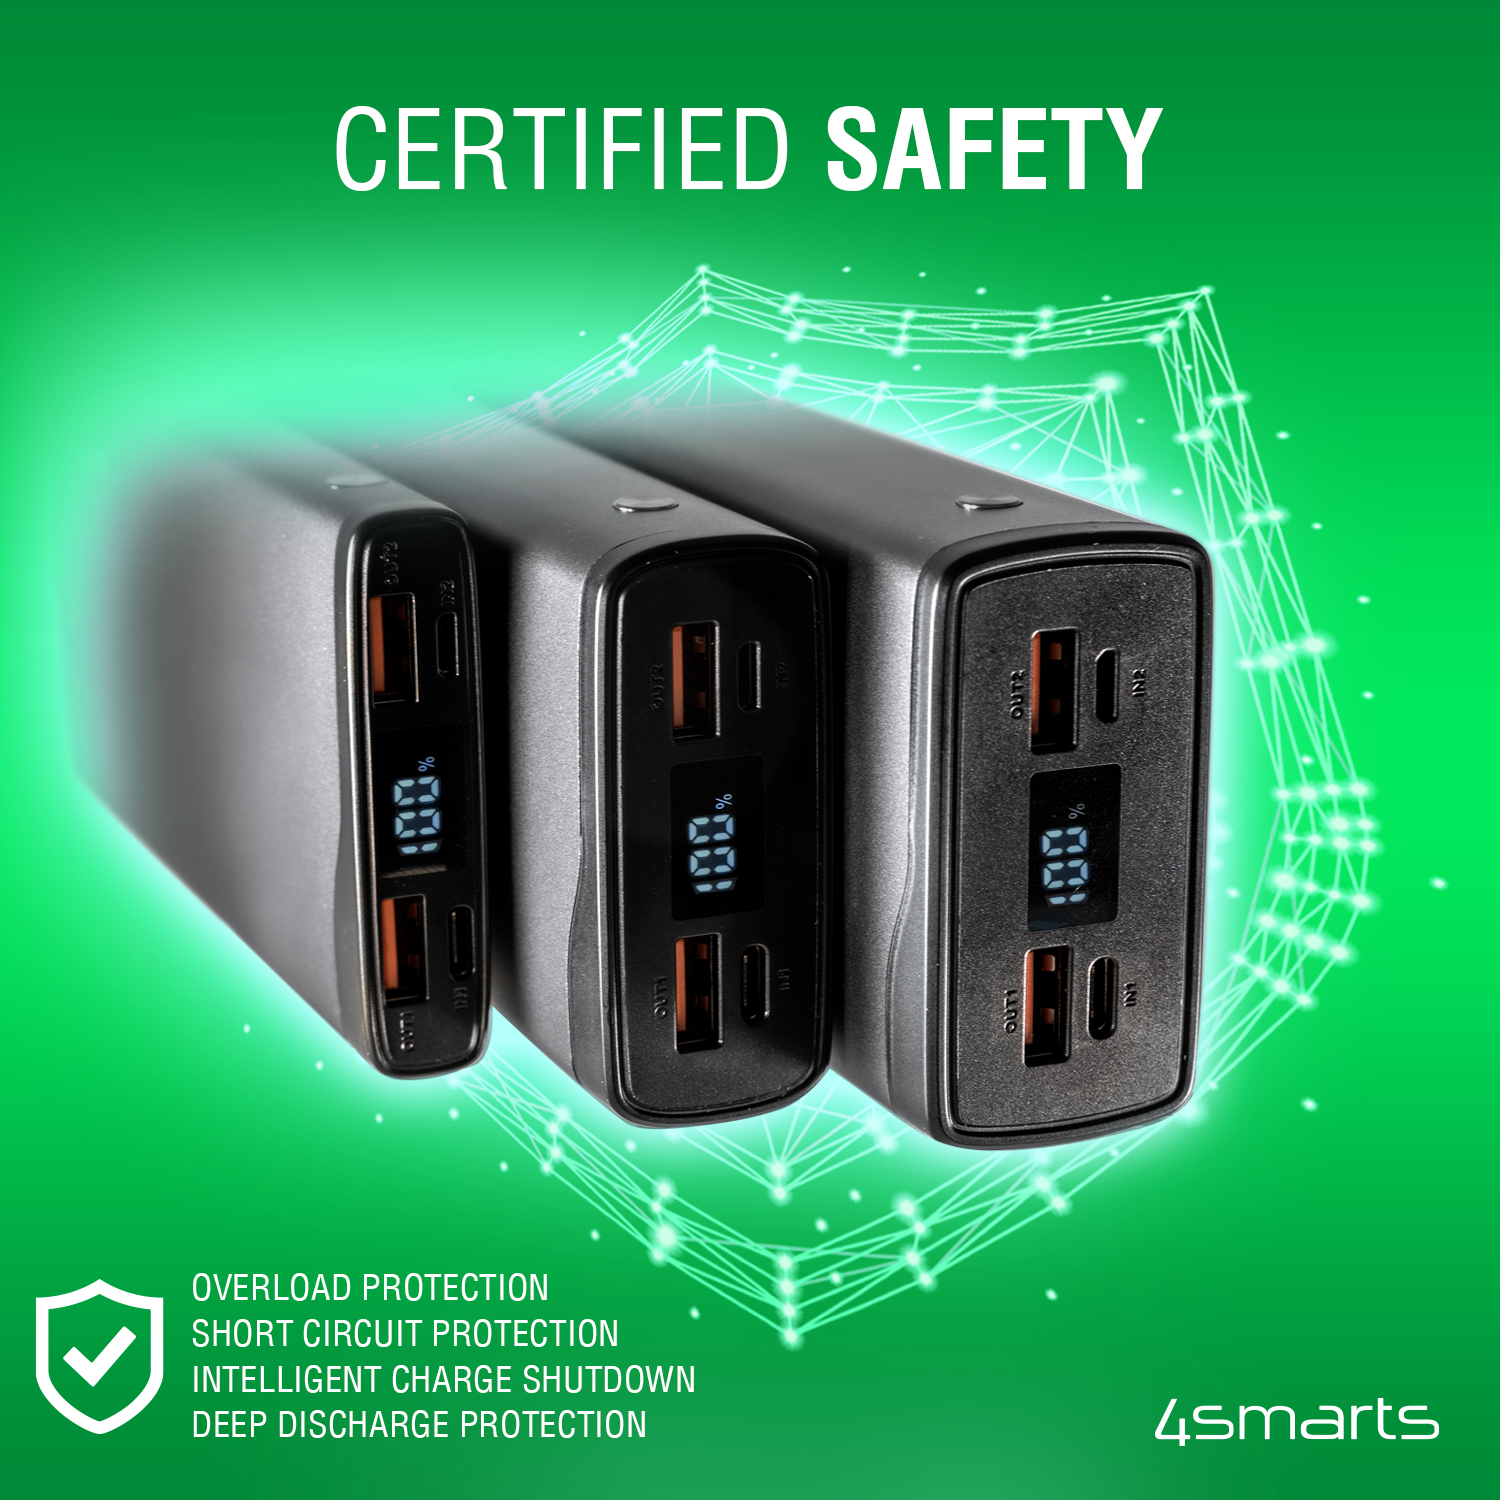 The material selection of the 4smarts VoltHub Pro 10000mAh 22.5W powerbank offers not only high impact and abrasion resistance, but also maximum safety.